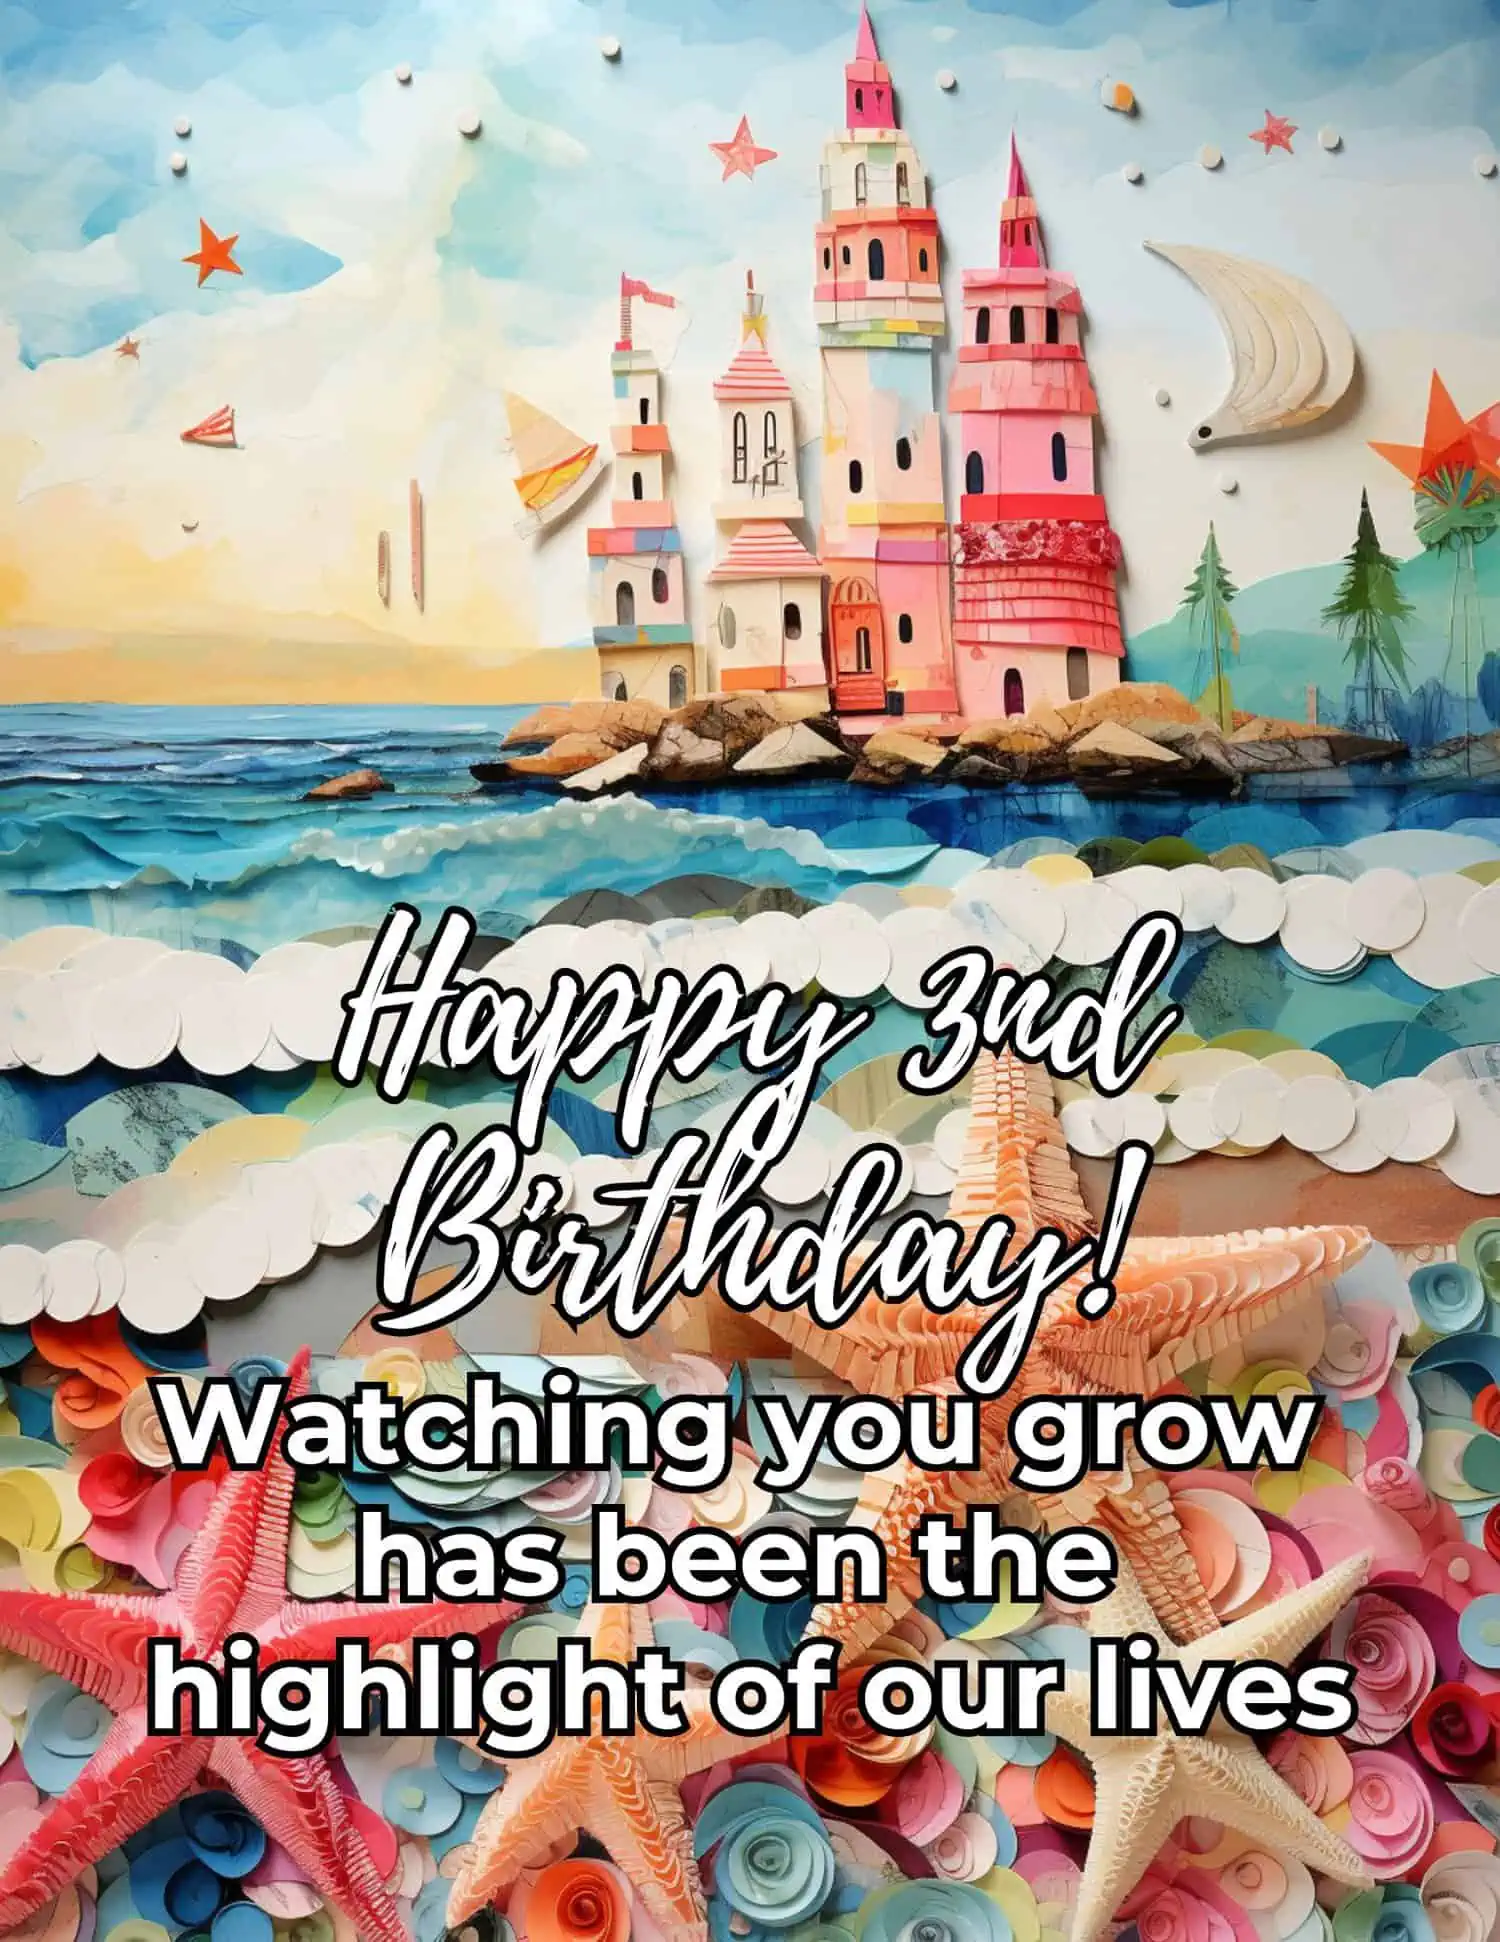 A heartfelt compilation of emotional birthday wishes for a child's third birthday, expressing deep affection, memories, and the joy of witnessing a child's growth and development.